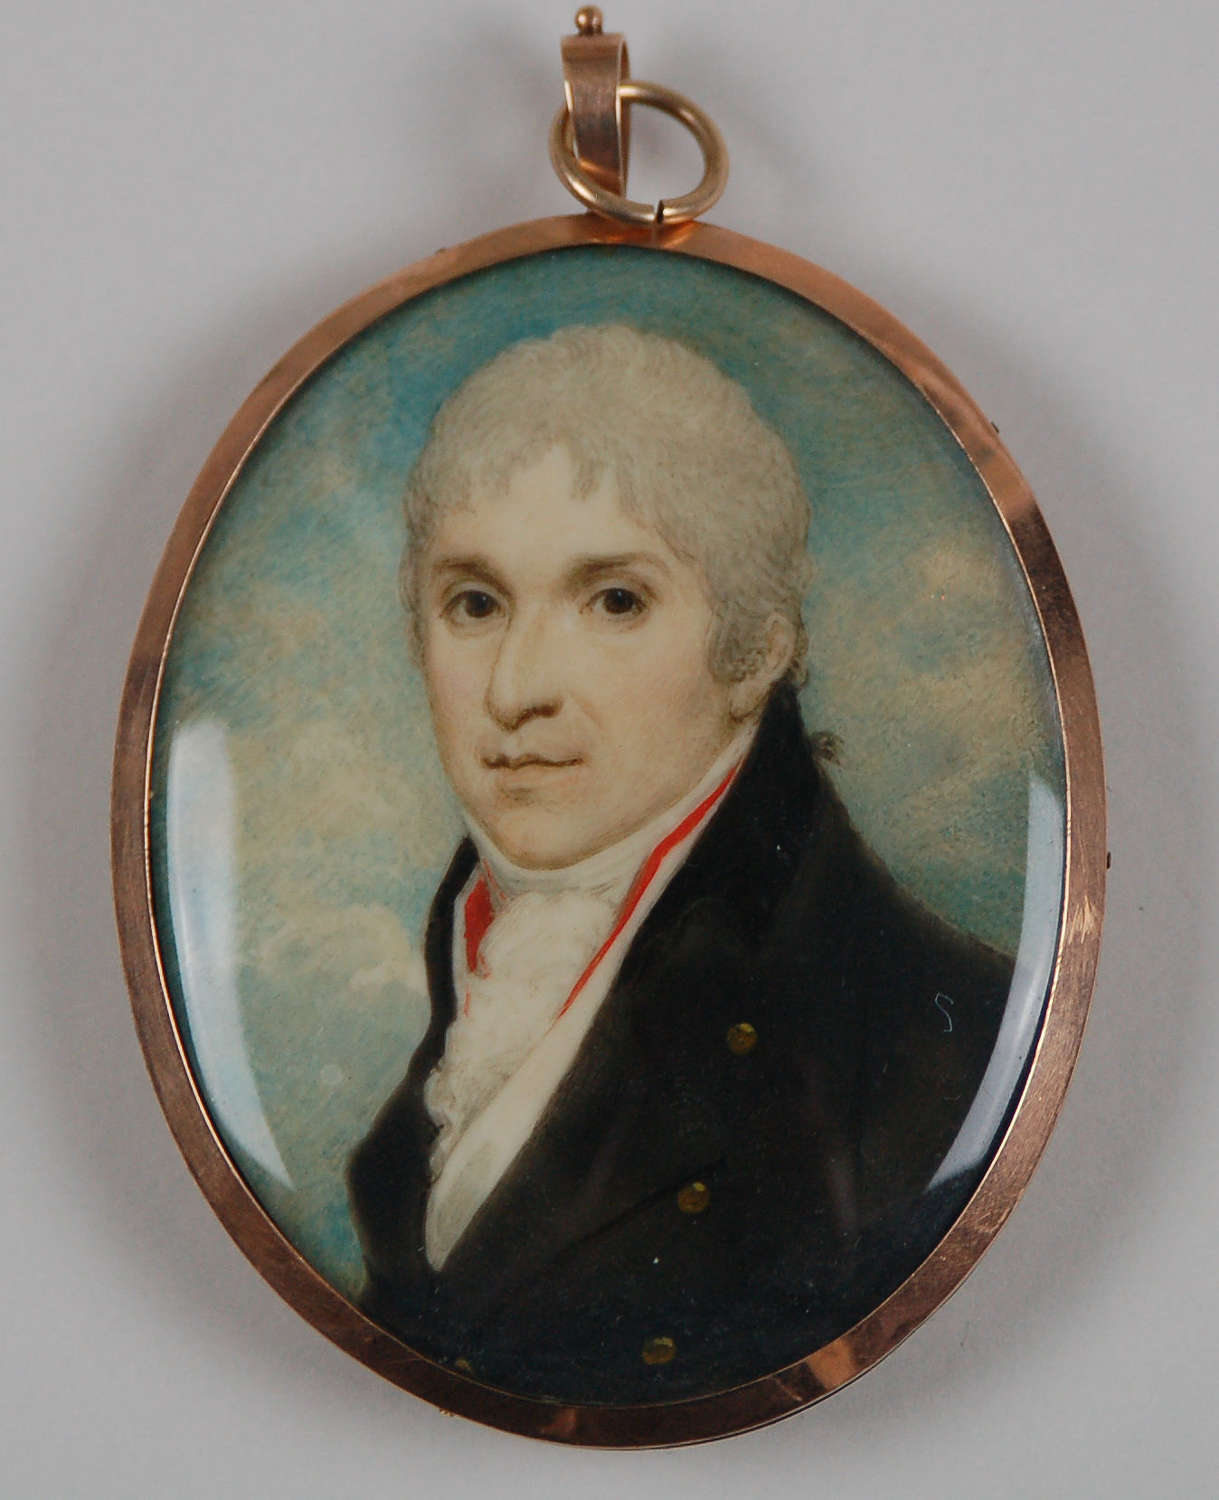 Miniature of a gent by S Shelley C1800